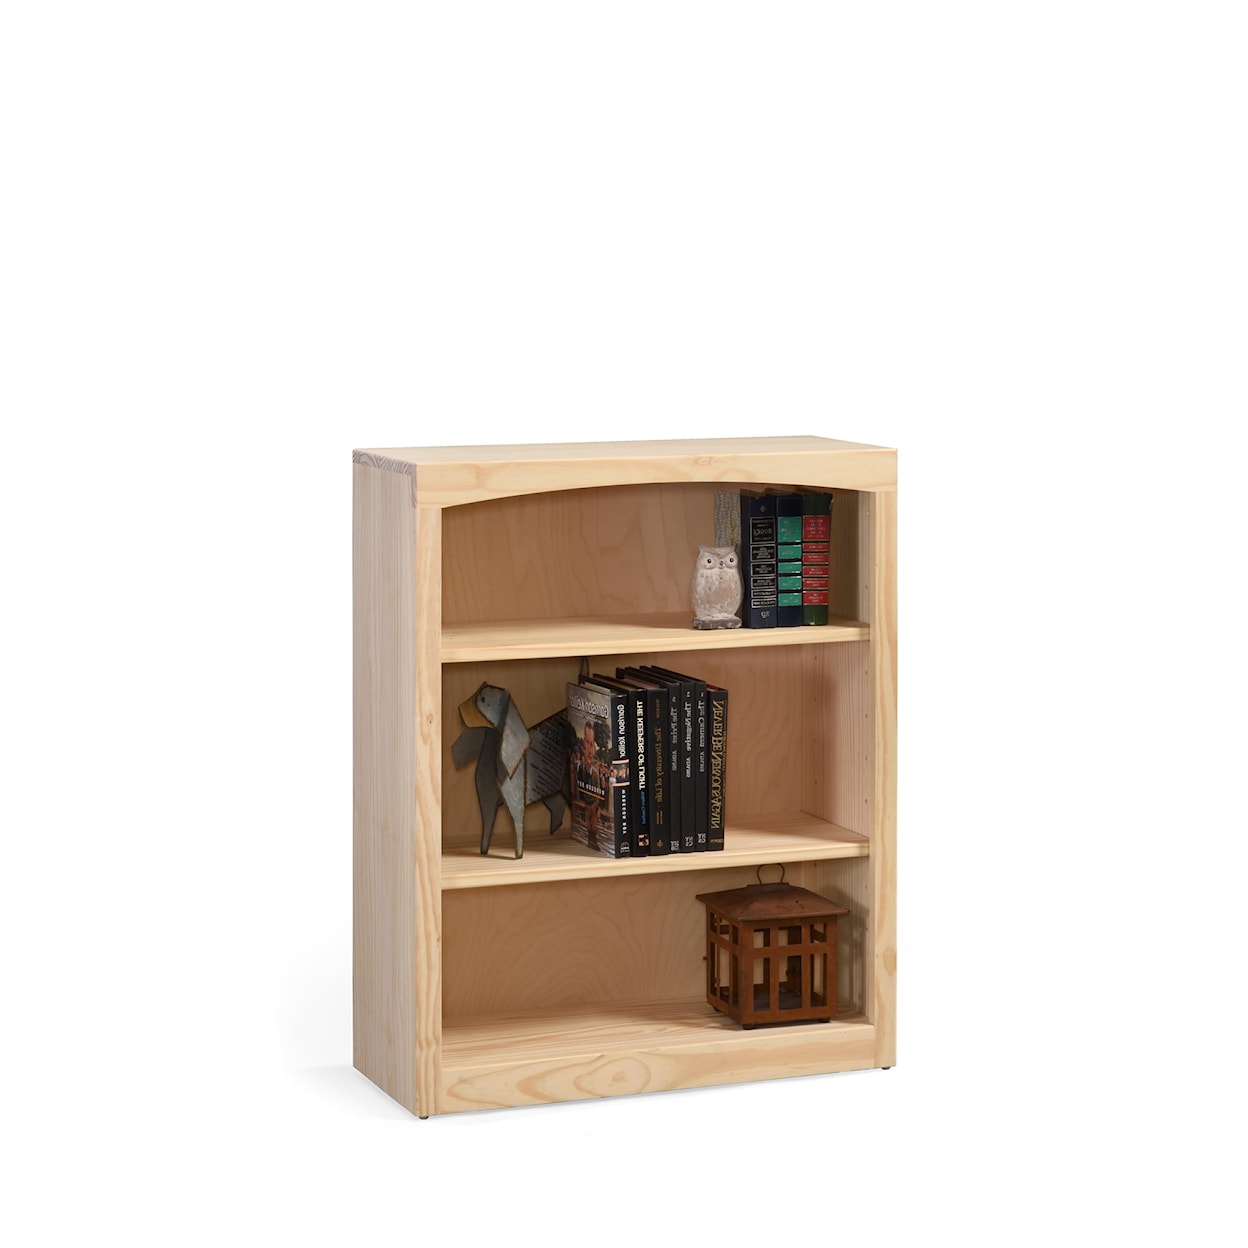 Archbold Furniture Pine Bookcases Customizable 36" Tall Pine Bookcase